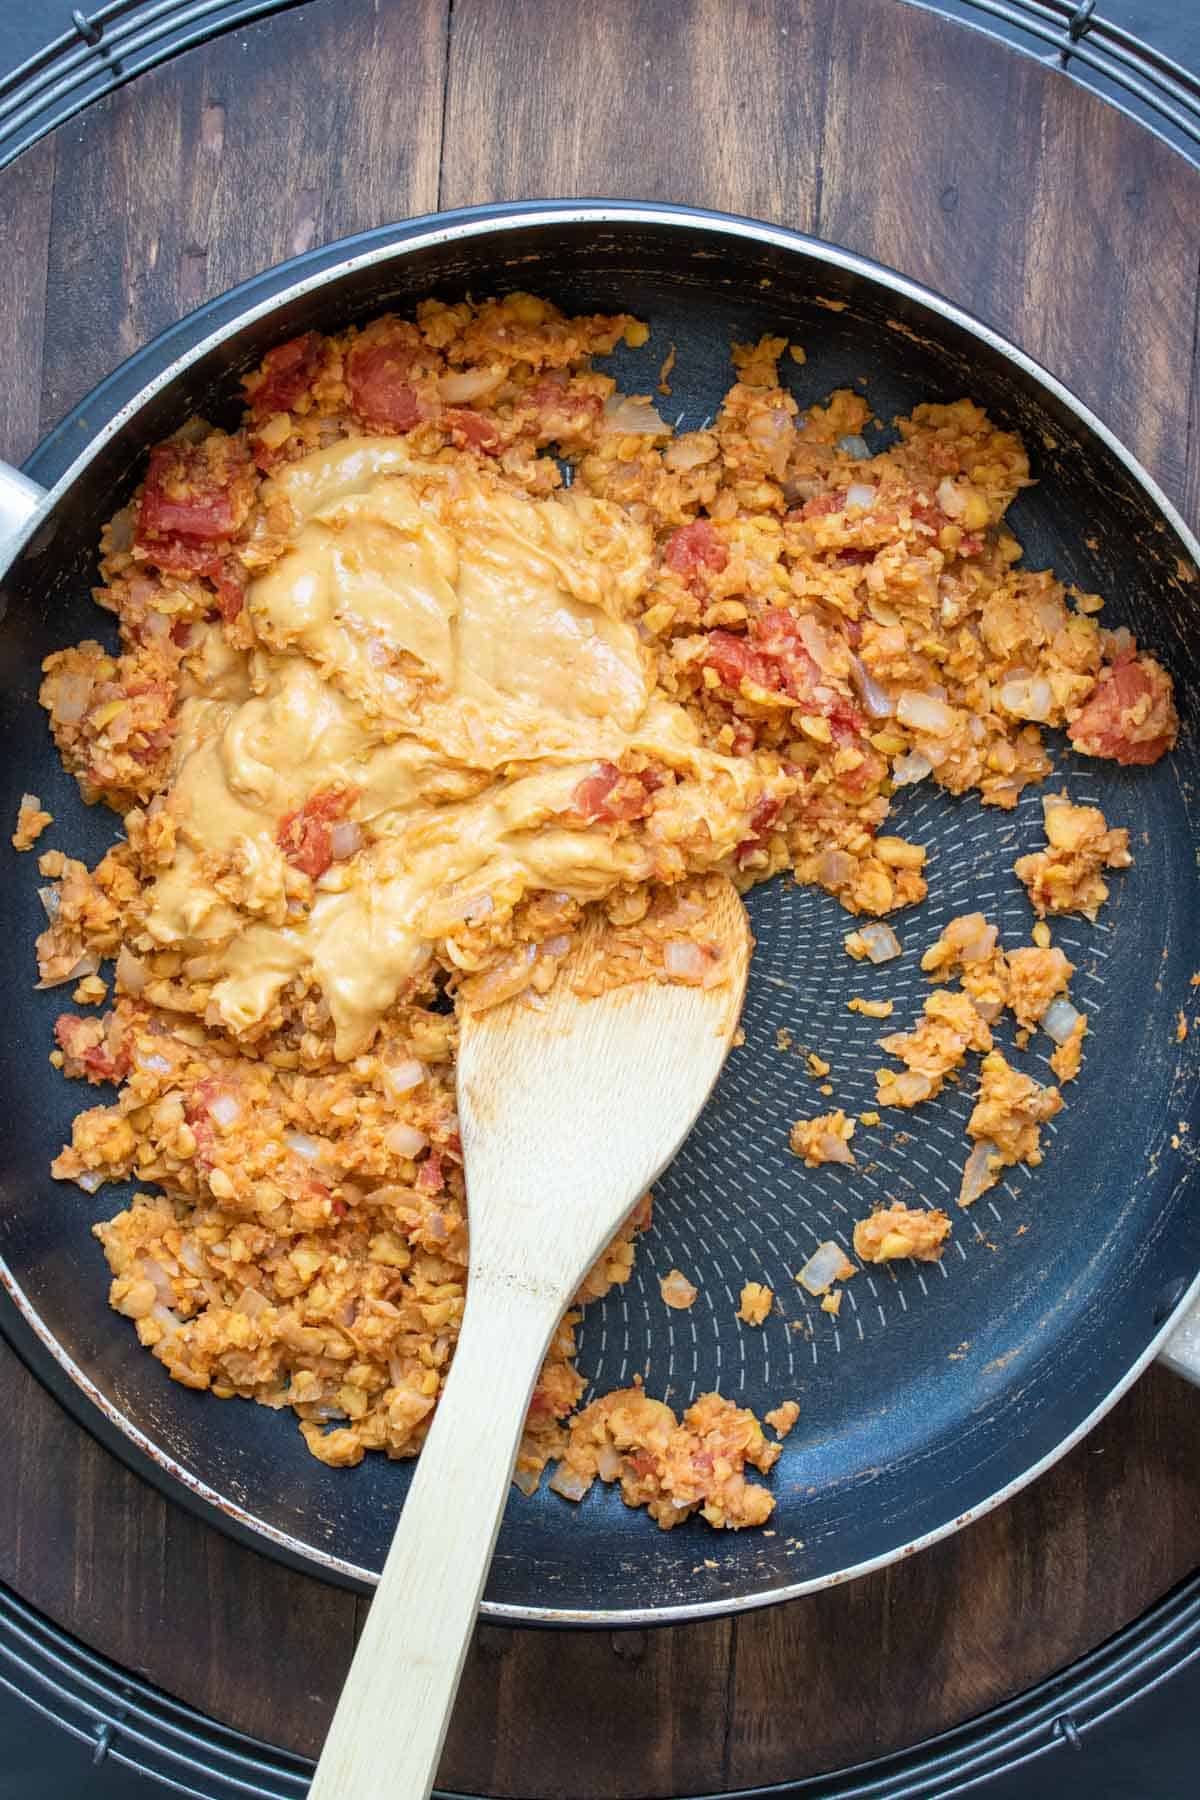 Wooden spoon mixing cheesy sauce into chopped chickpeas and chopped tomatoes in a pan